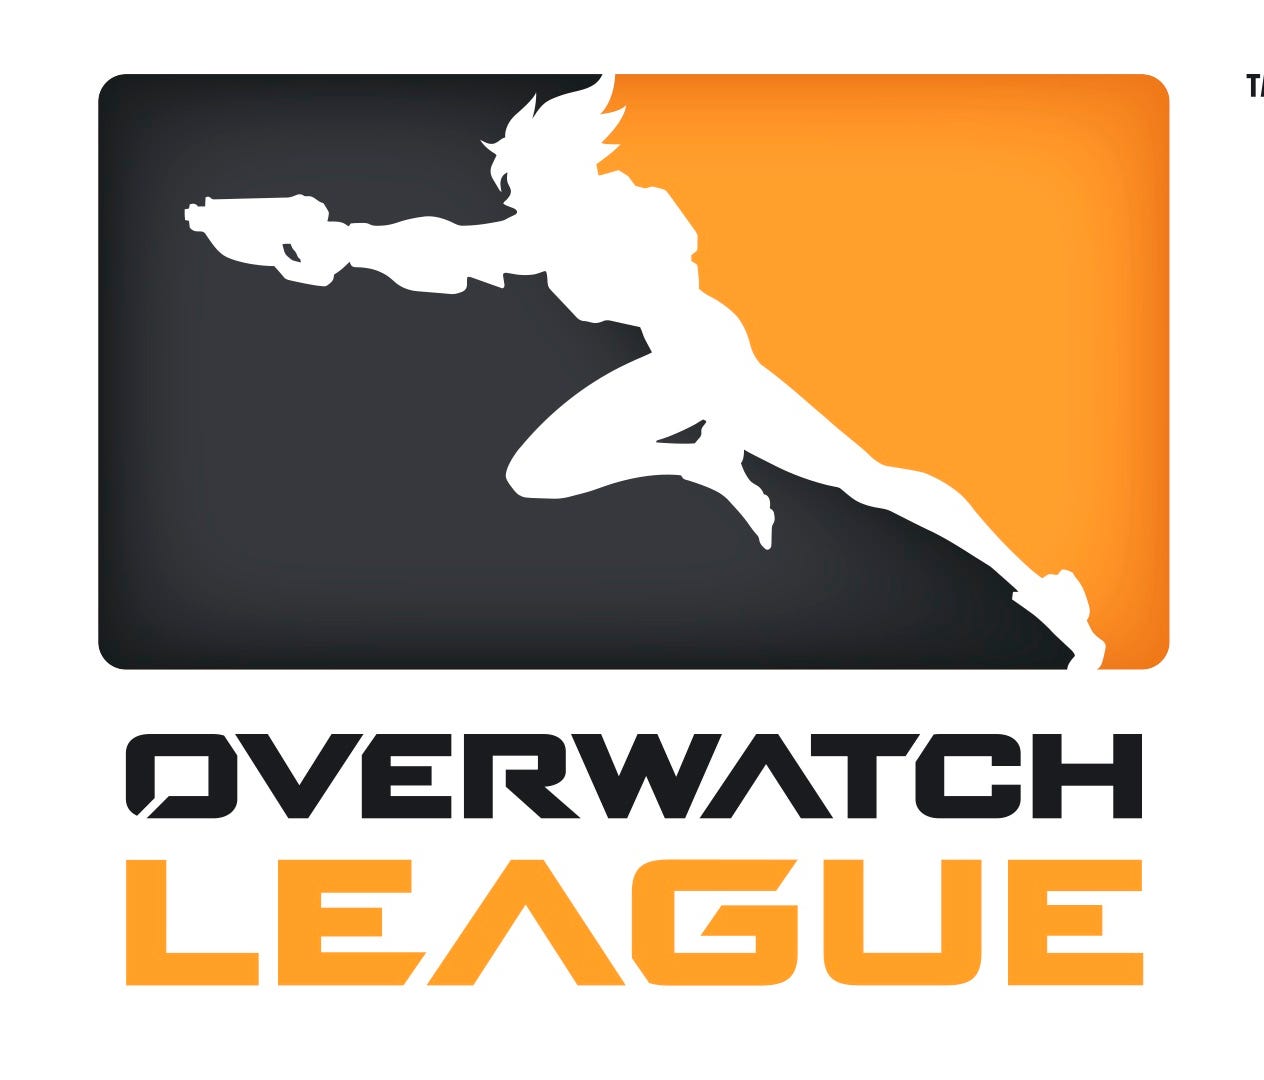 A logo for The Overwatch League.